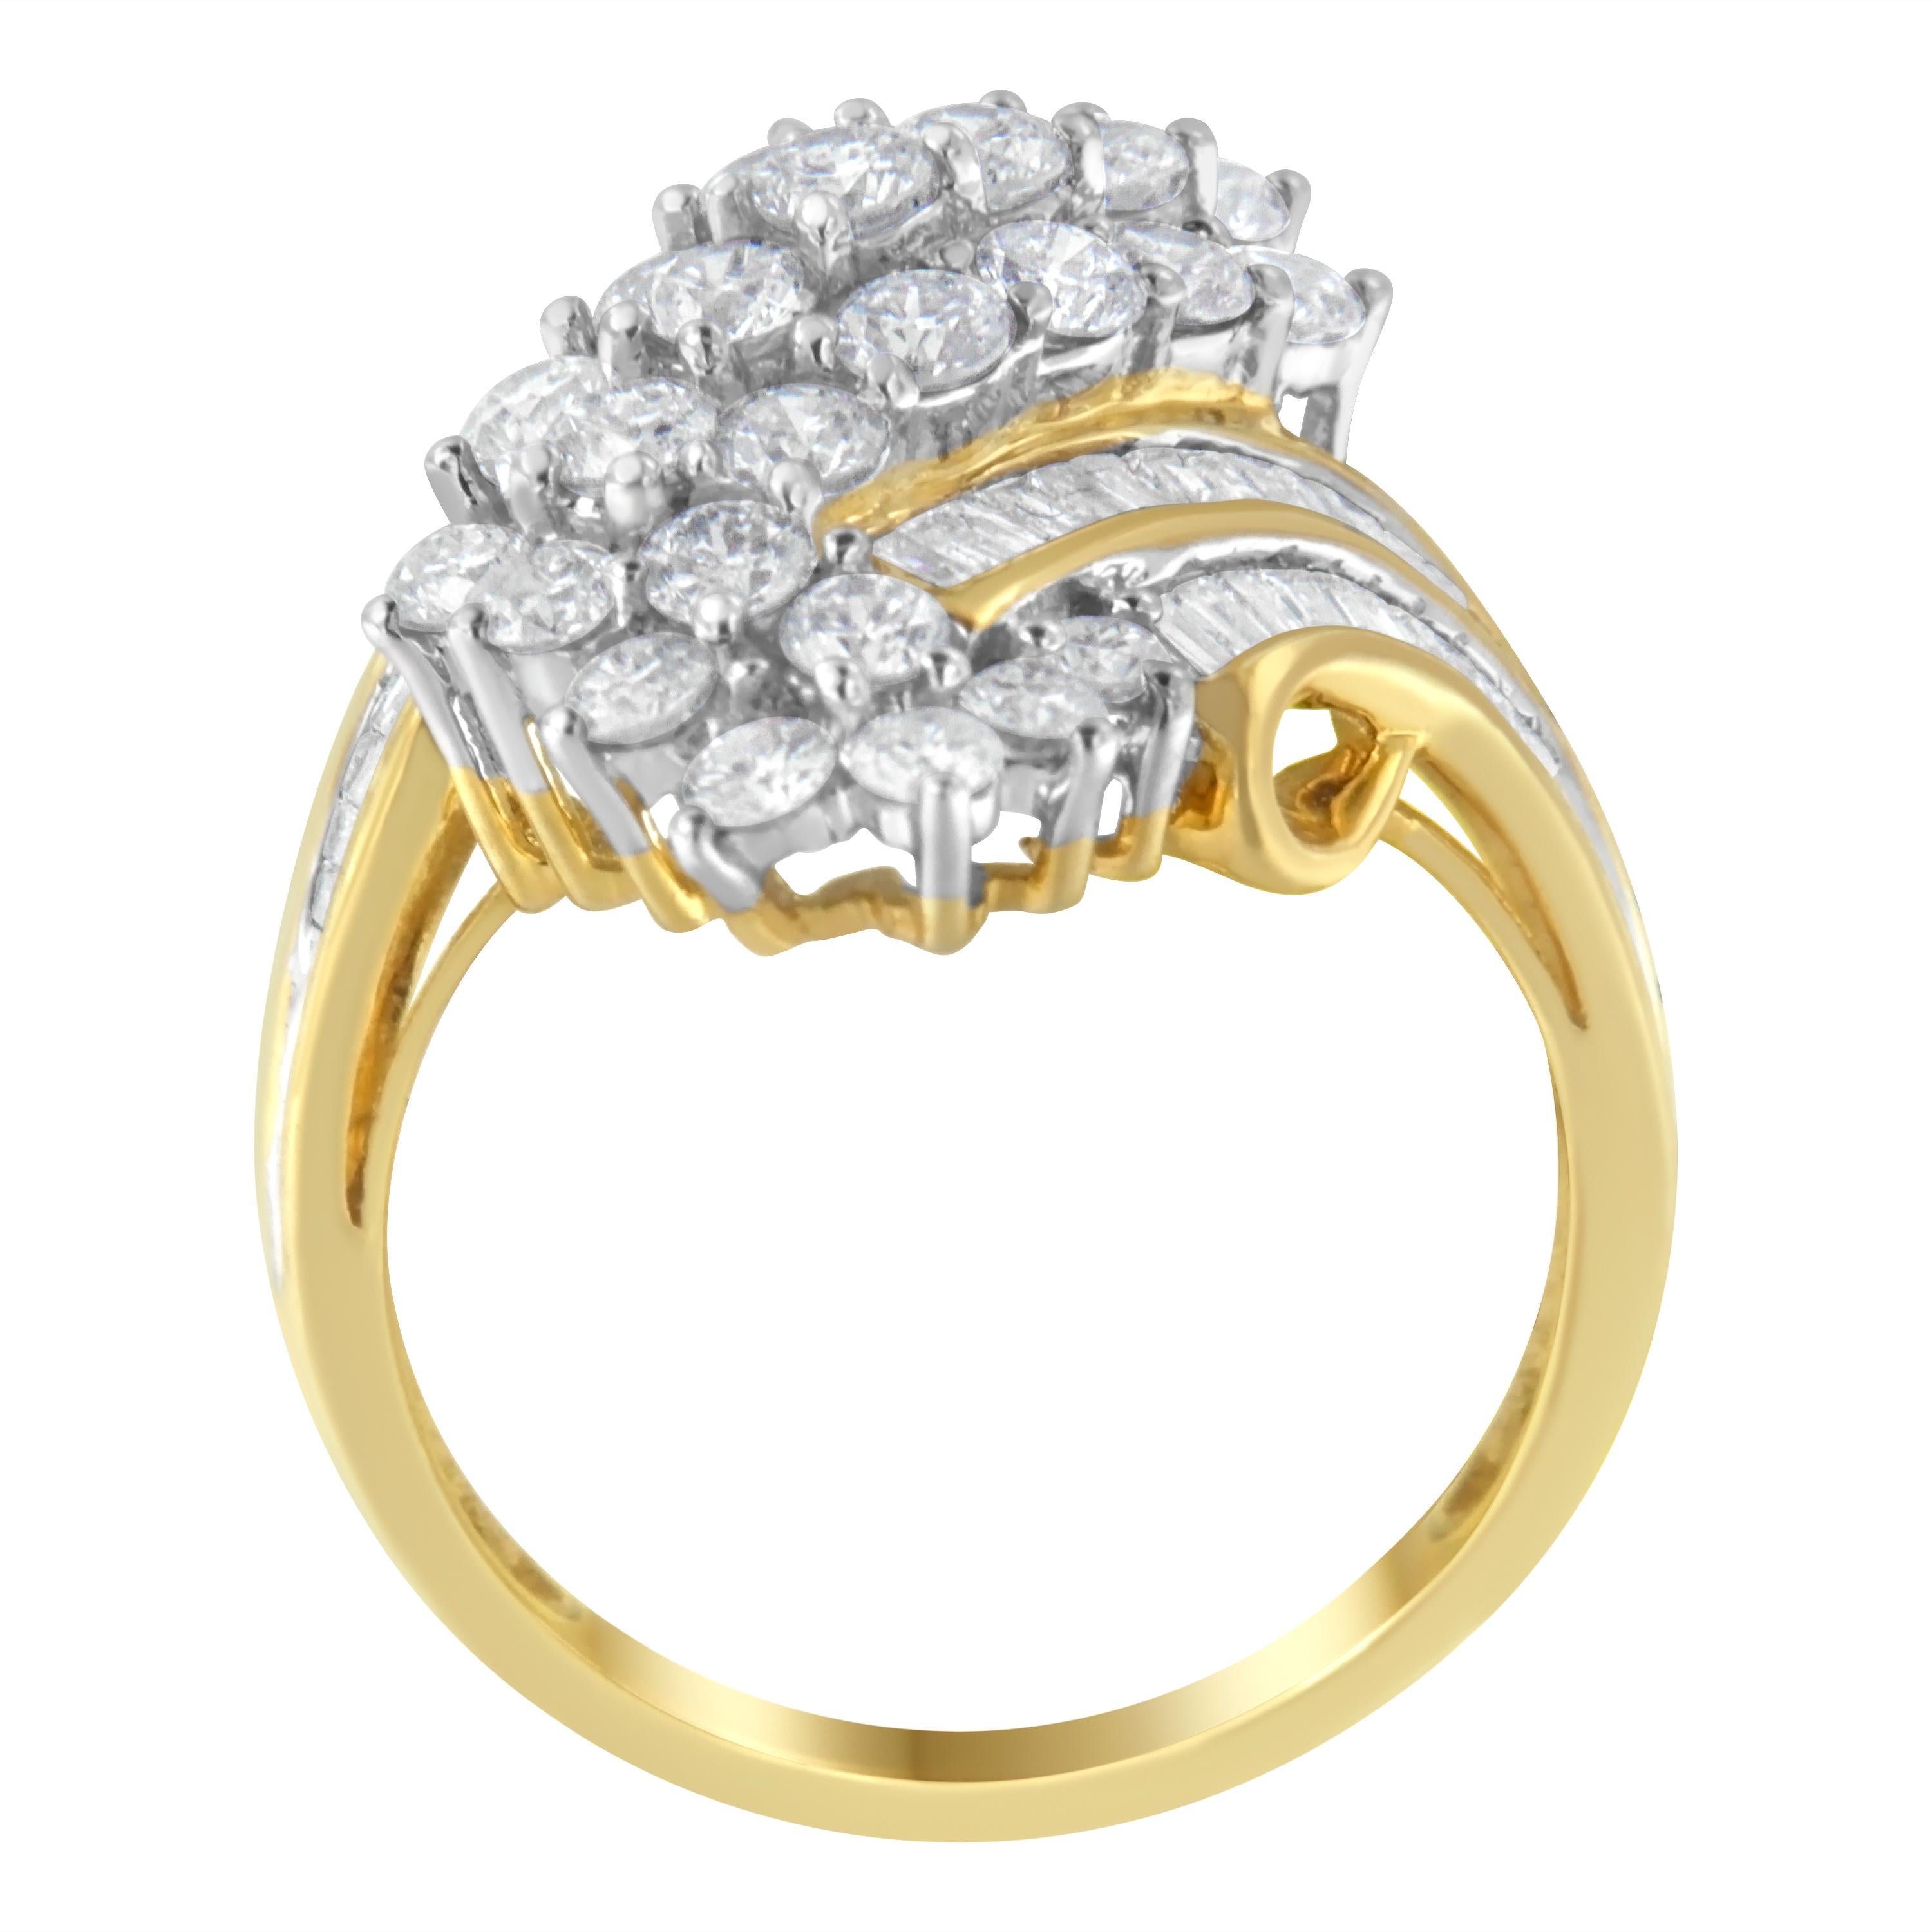 A diamond cluster ring that glistens with a striking 81 diamonds arranged in a retro style. The mix of round brilliant cut and baguette diamonds adds a geometric contrast to the design, while the 10 karat yellow gold band adds a warming touch. The